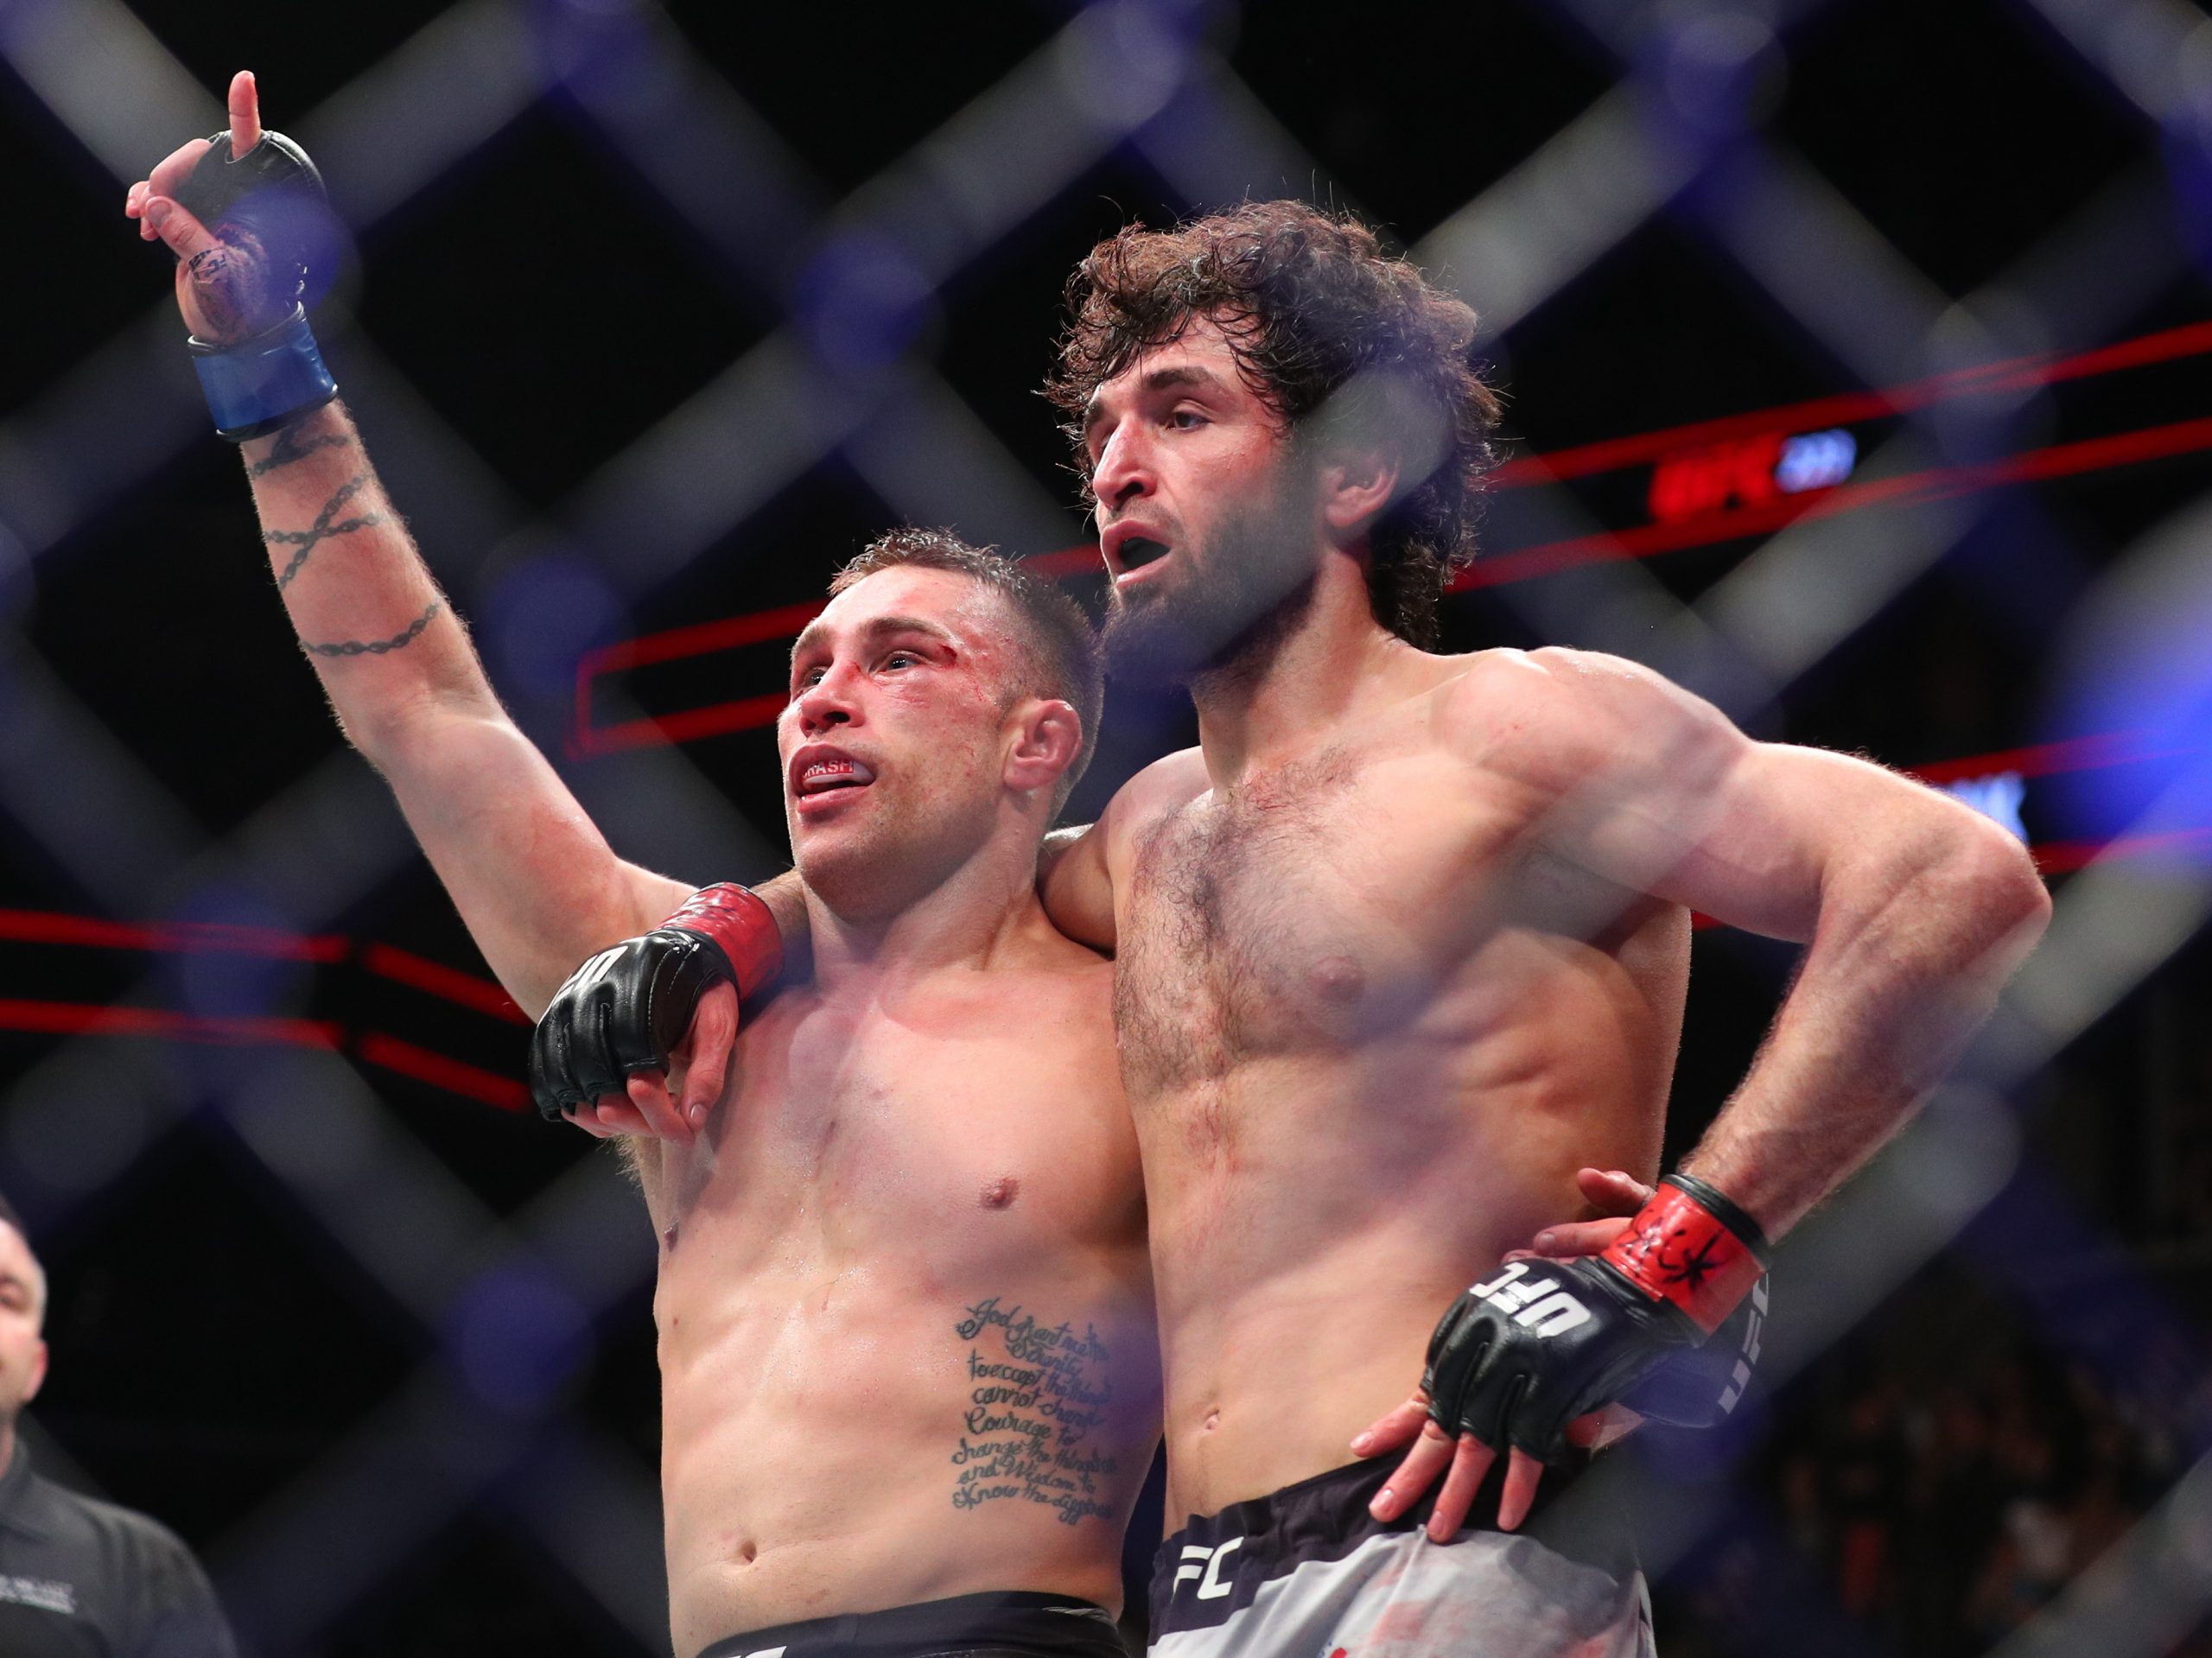 Zabit Magomedsharipov was expected to fight Yair Rodriguez next